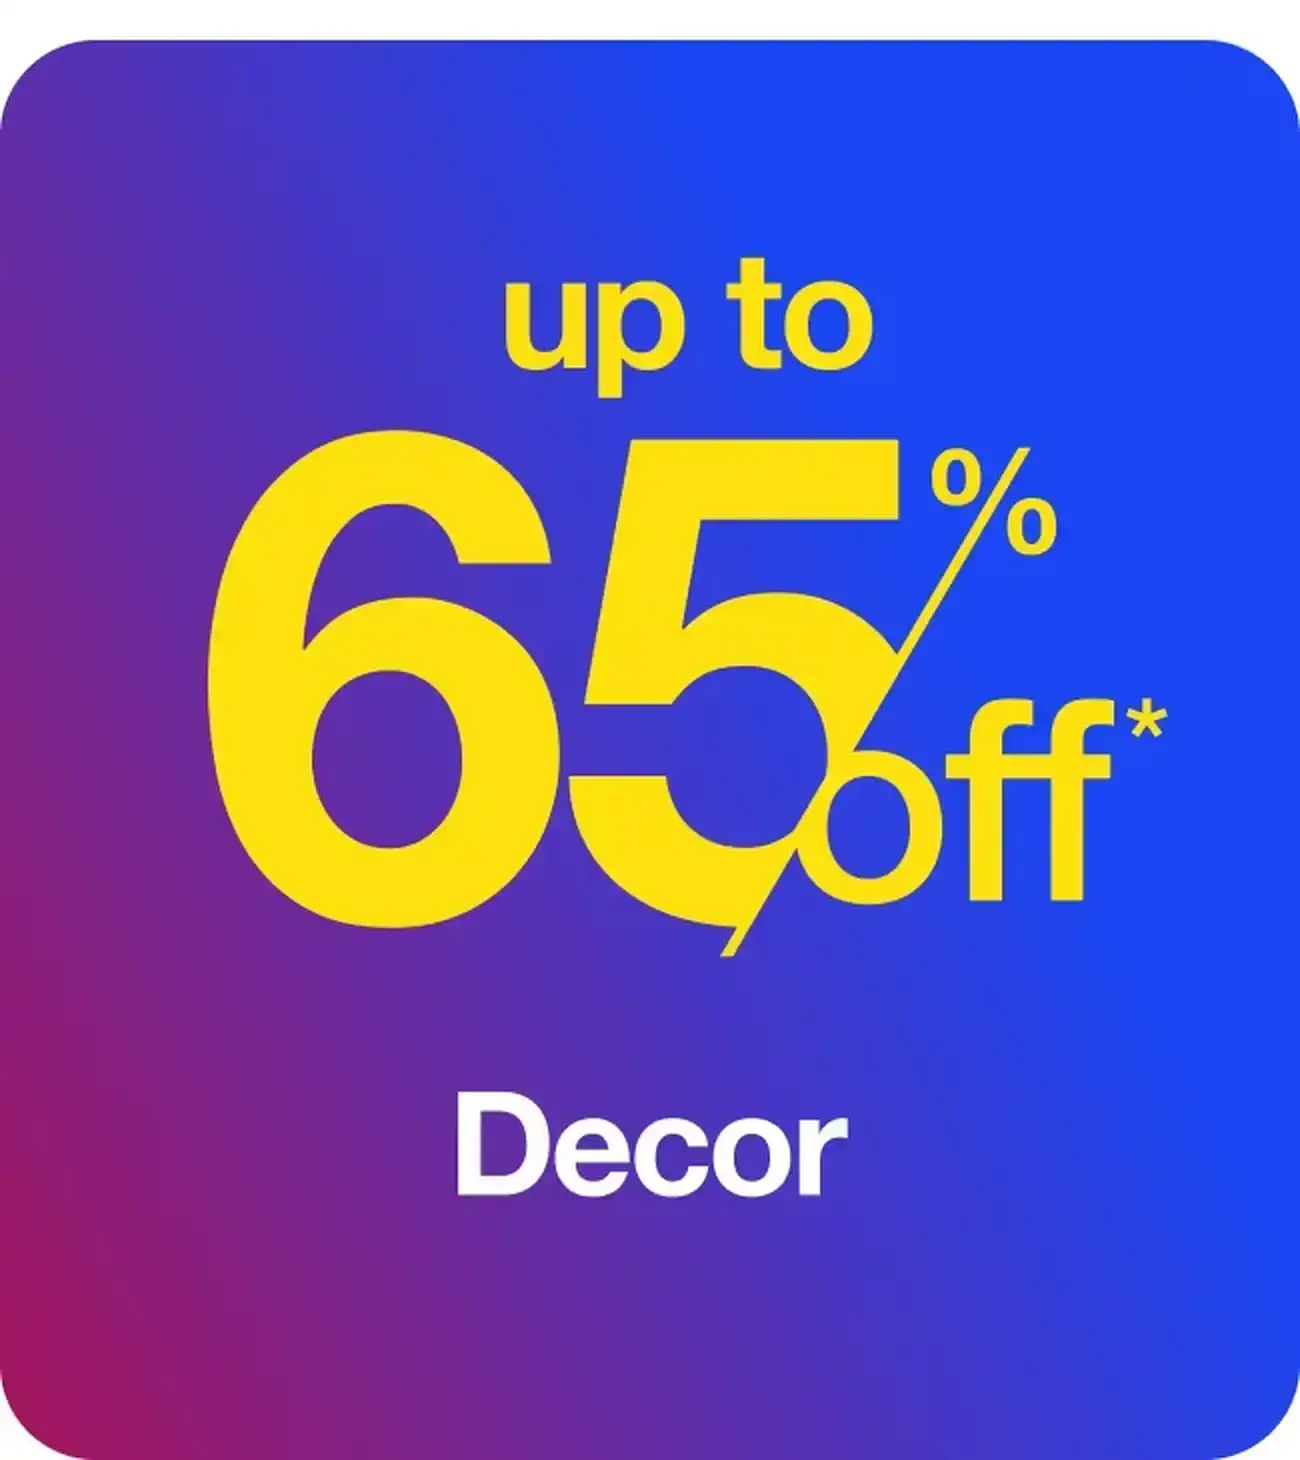 Up to 65% Decor